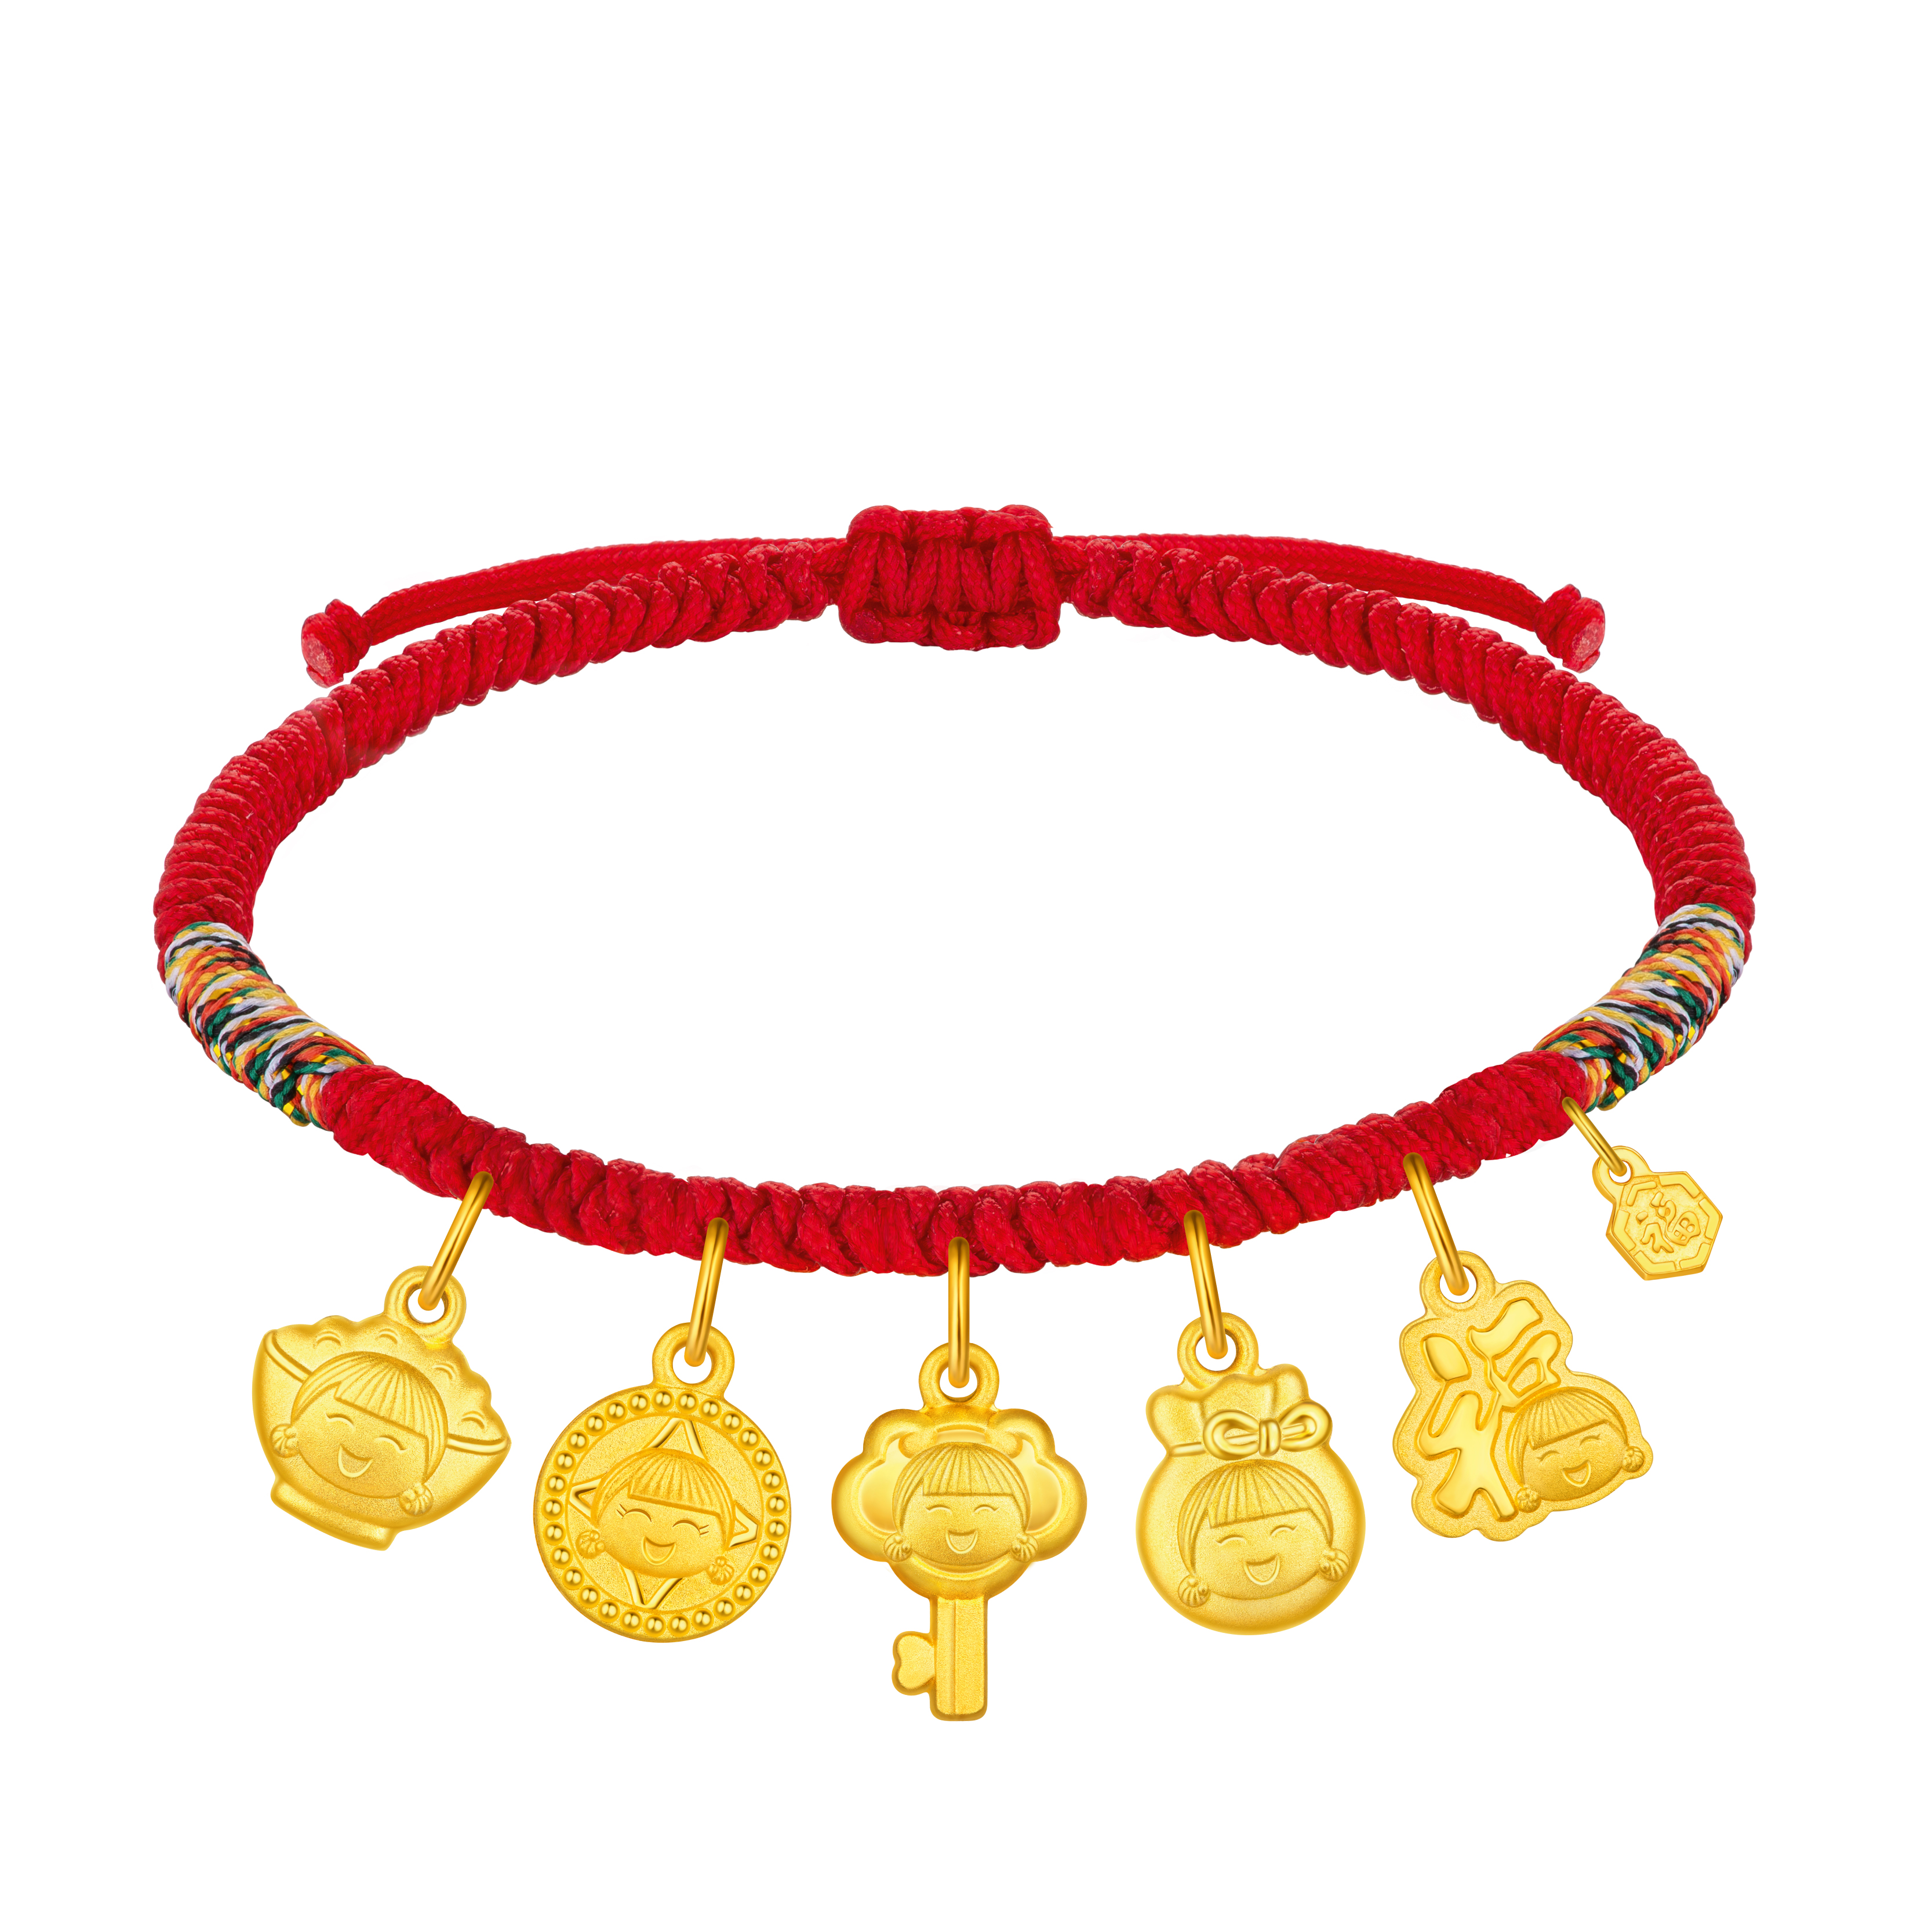 Hugging Family Ting ting “Auspicious Treasures” Gold Baby Bracelet